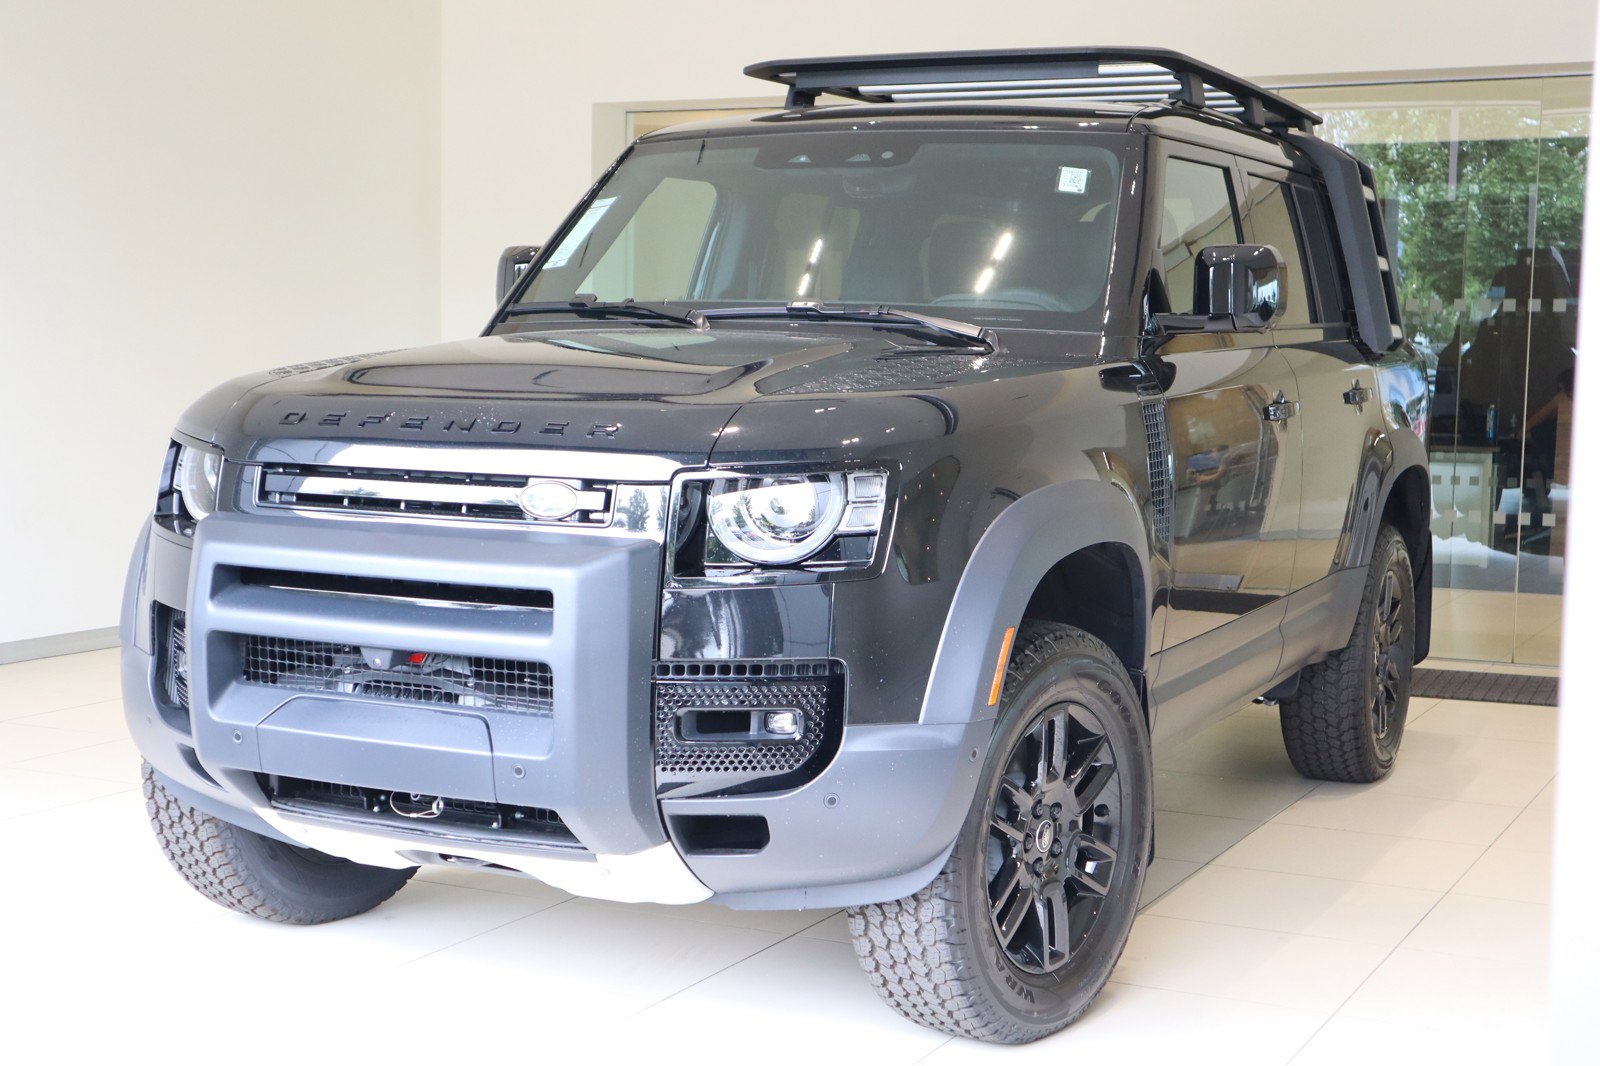 Defender lineup expands to three vehicles as Land Rover adds 8-seat 130  version